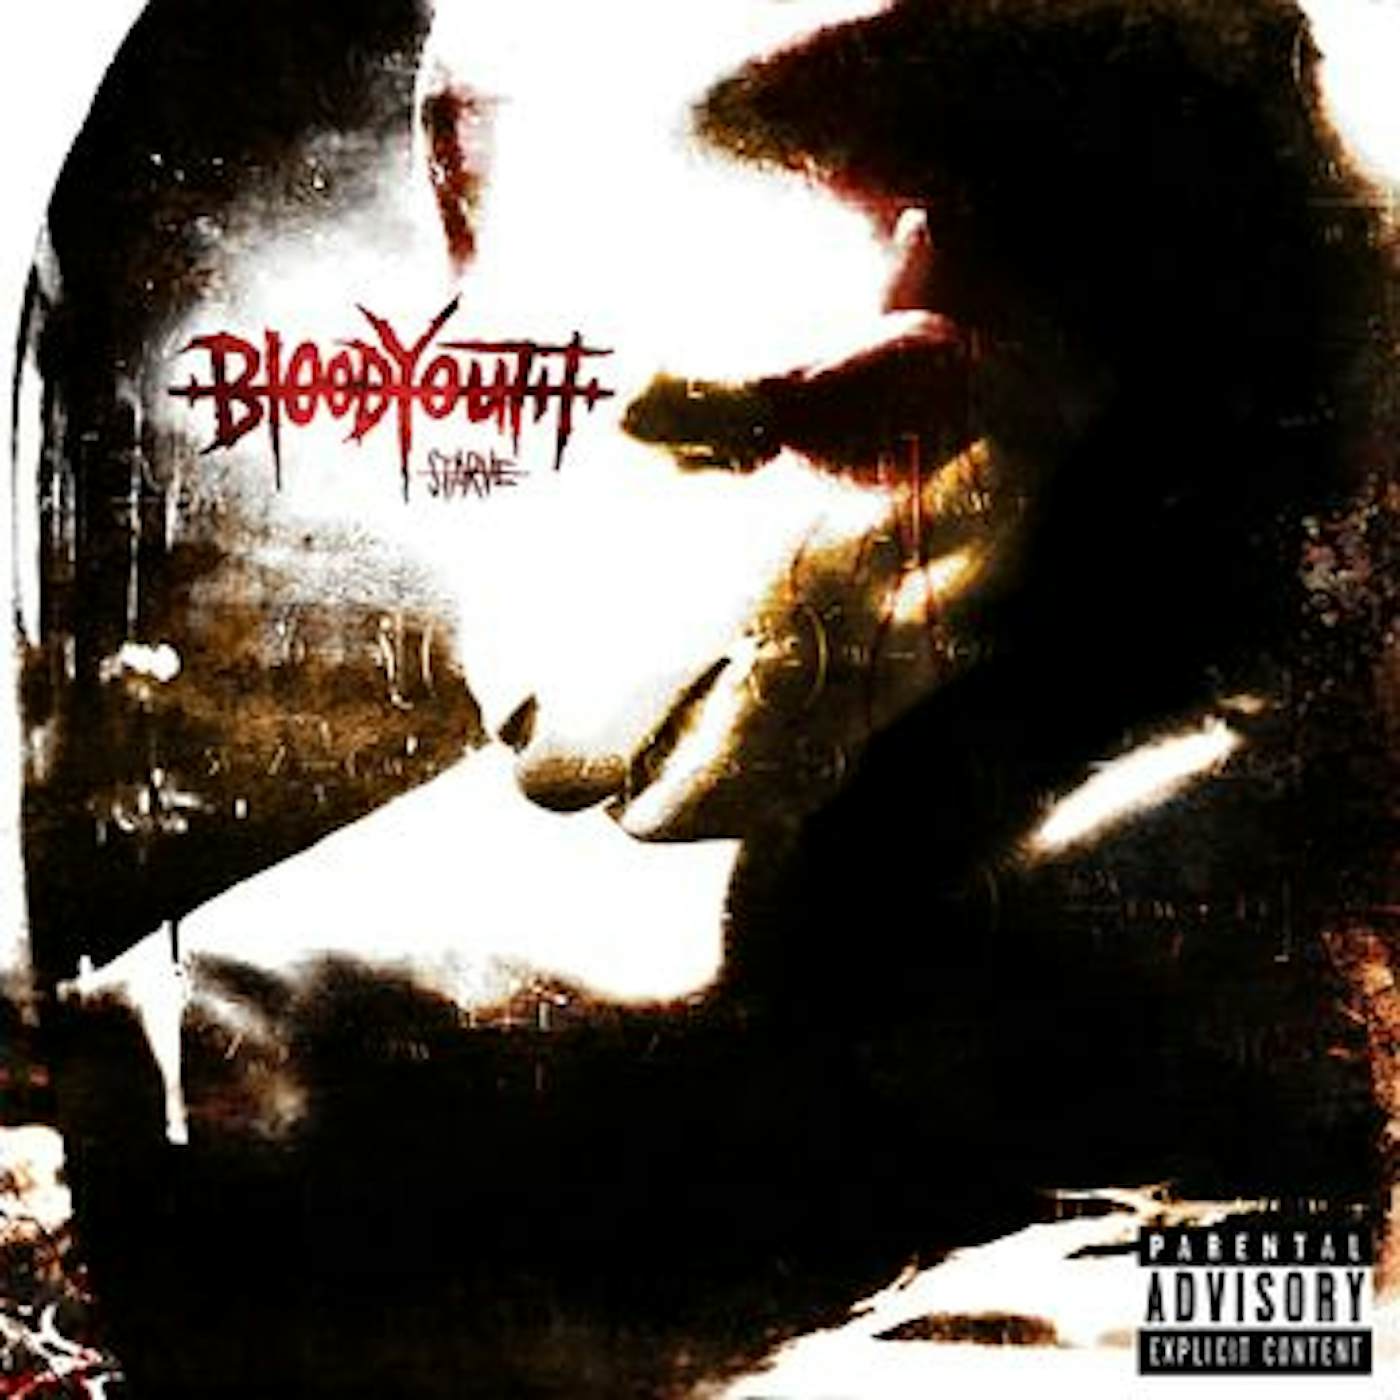 Blood Youth Starve Vinyl Record